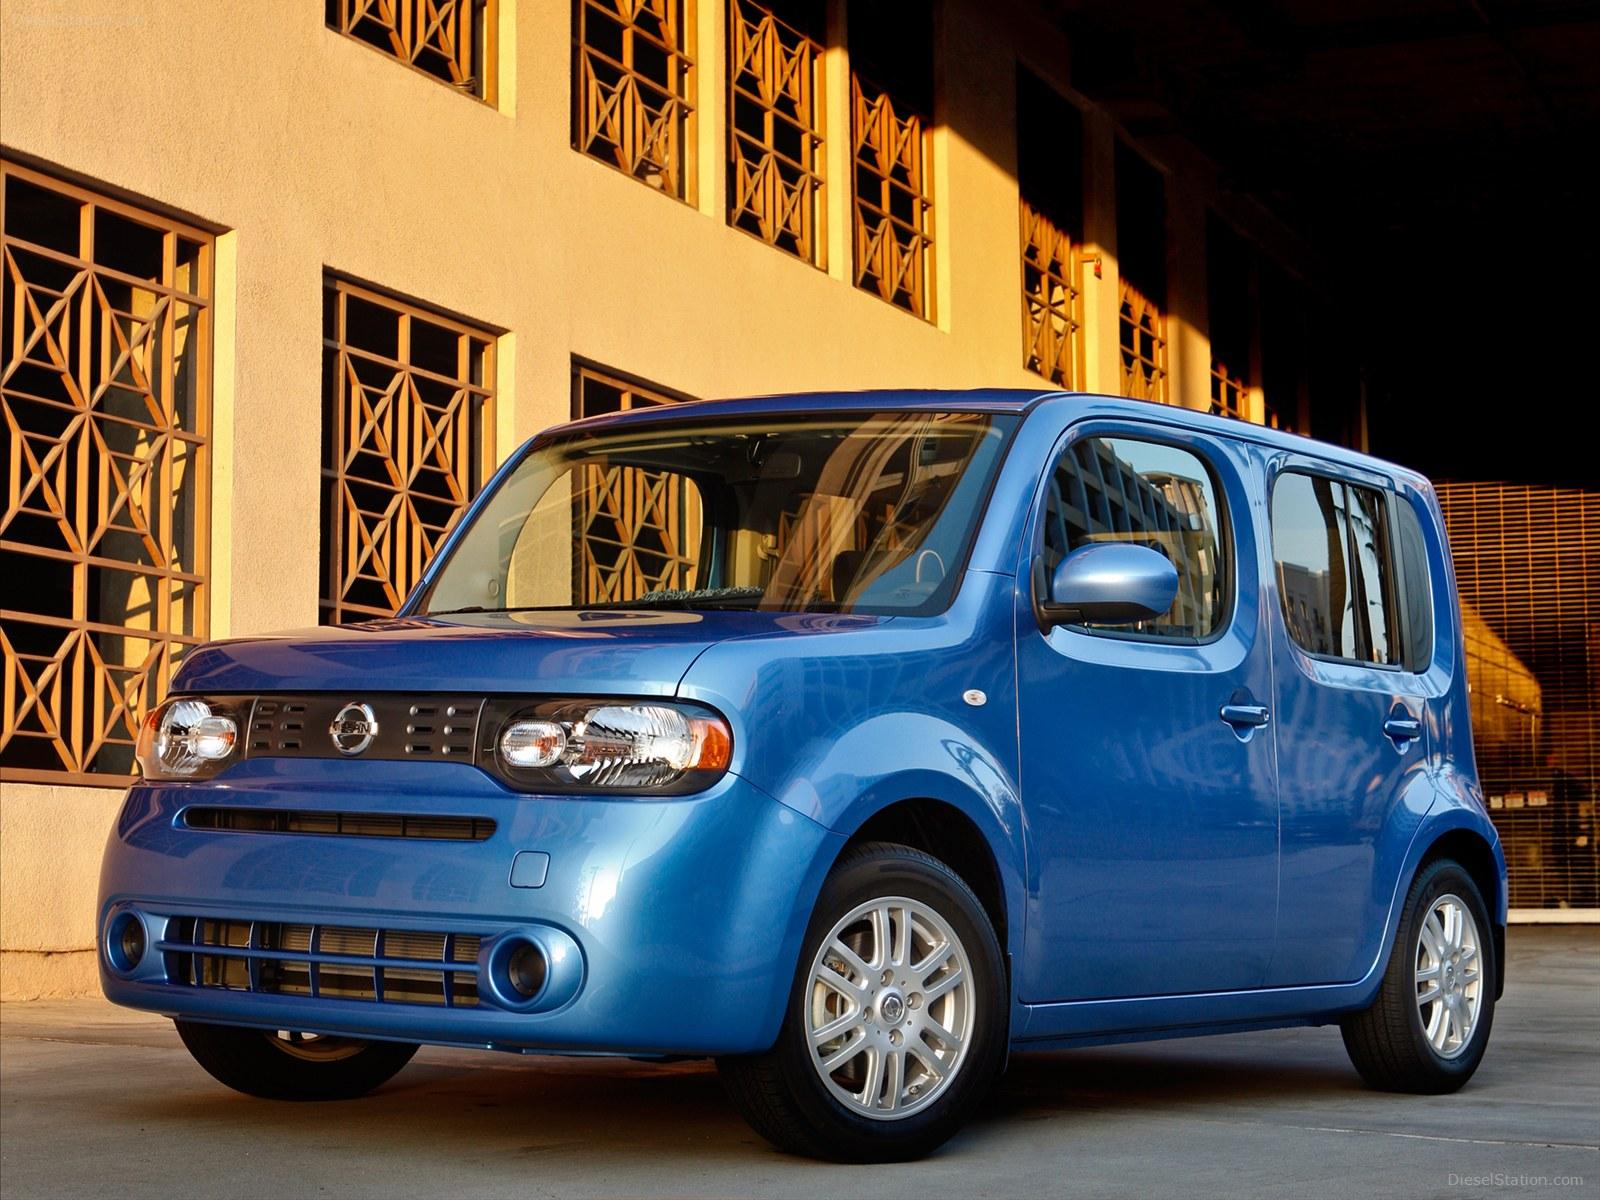 Nissan Cube 2012 Exotic Car Wallpaper of 50, Diesel Station